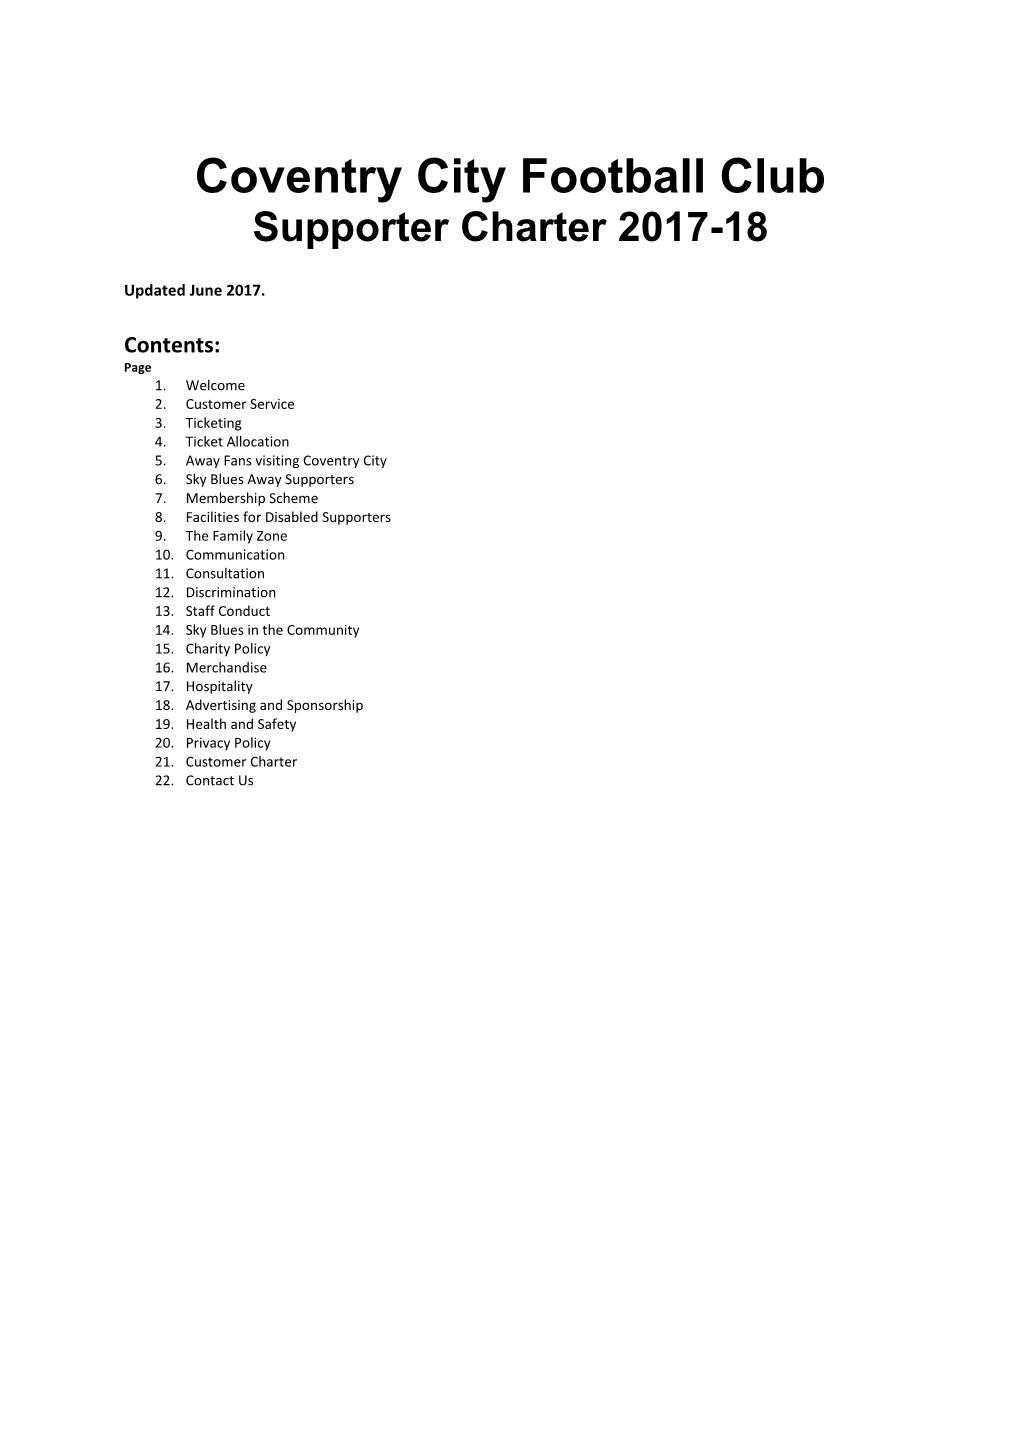 Coventry City Football Club Supporter Charter 2017-18